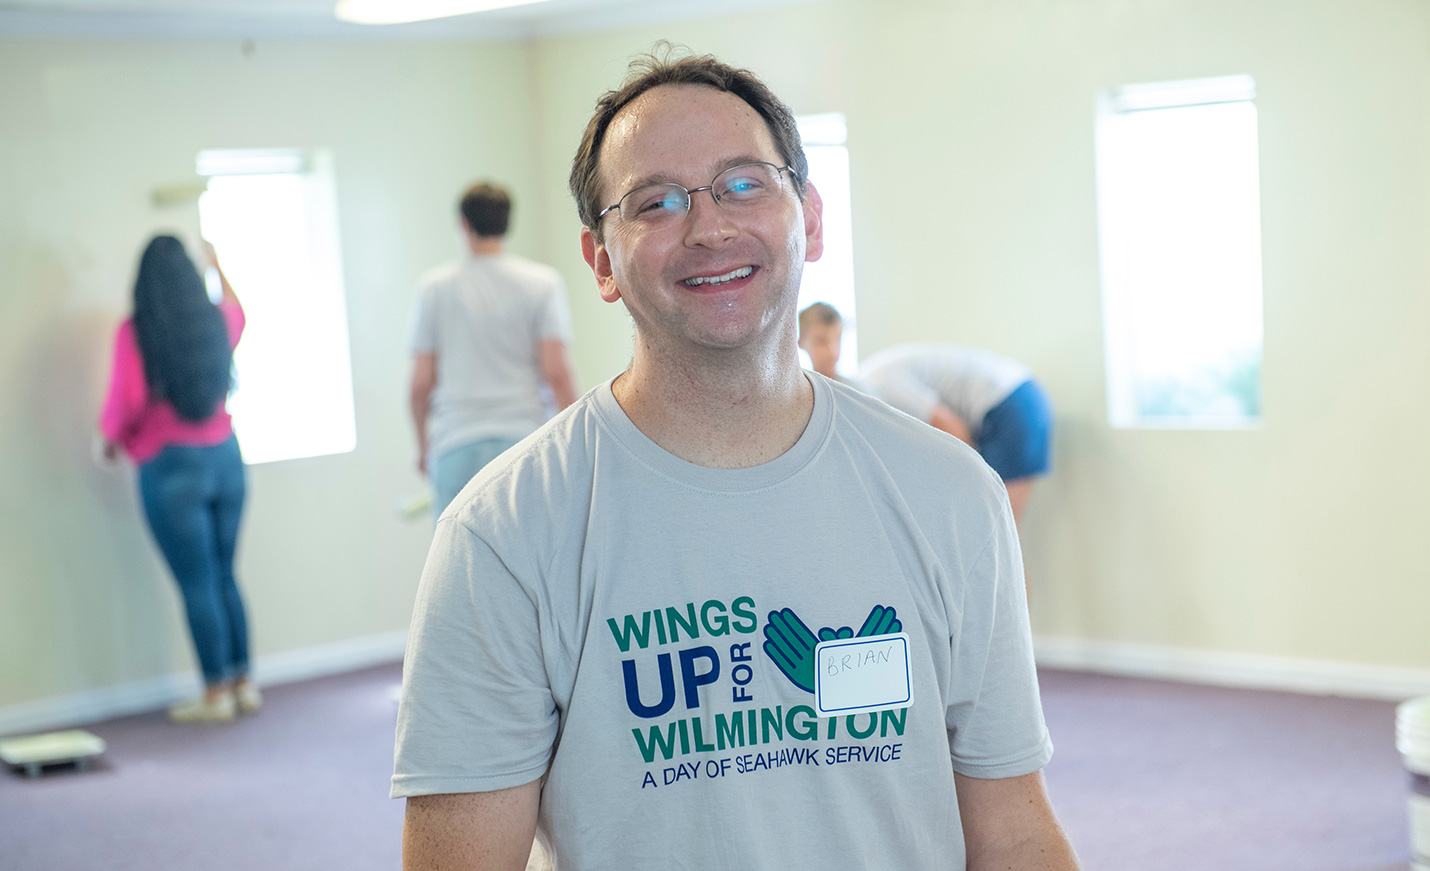 A man volunteering at Wings Up Wilmington wears a T-shirt bearing the event's logo